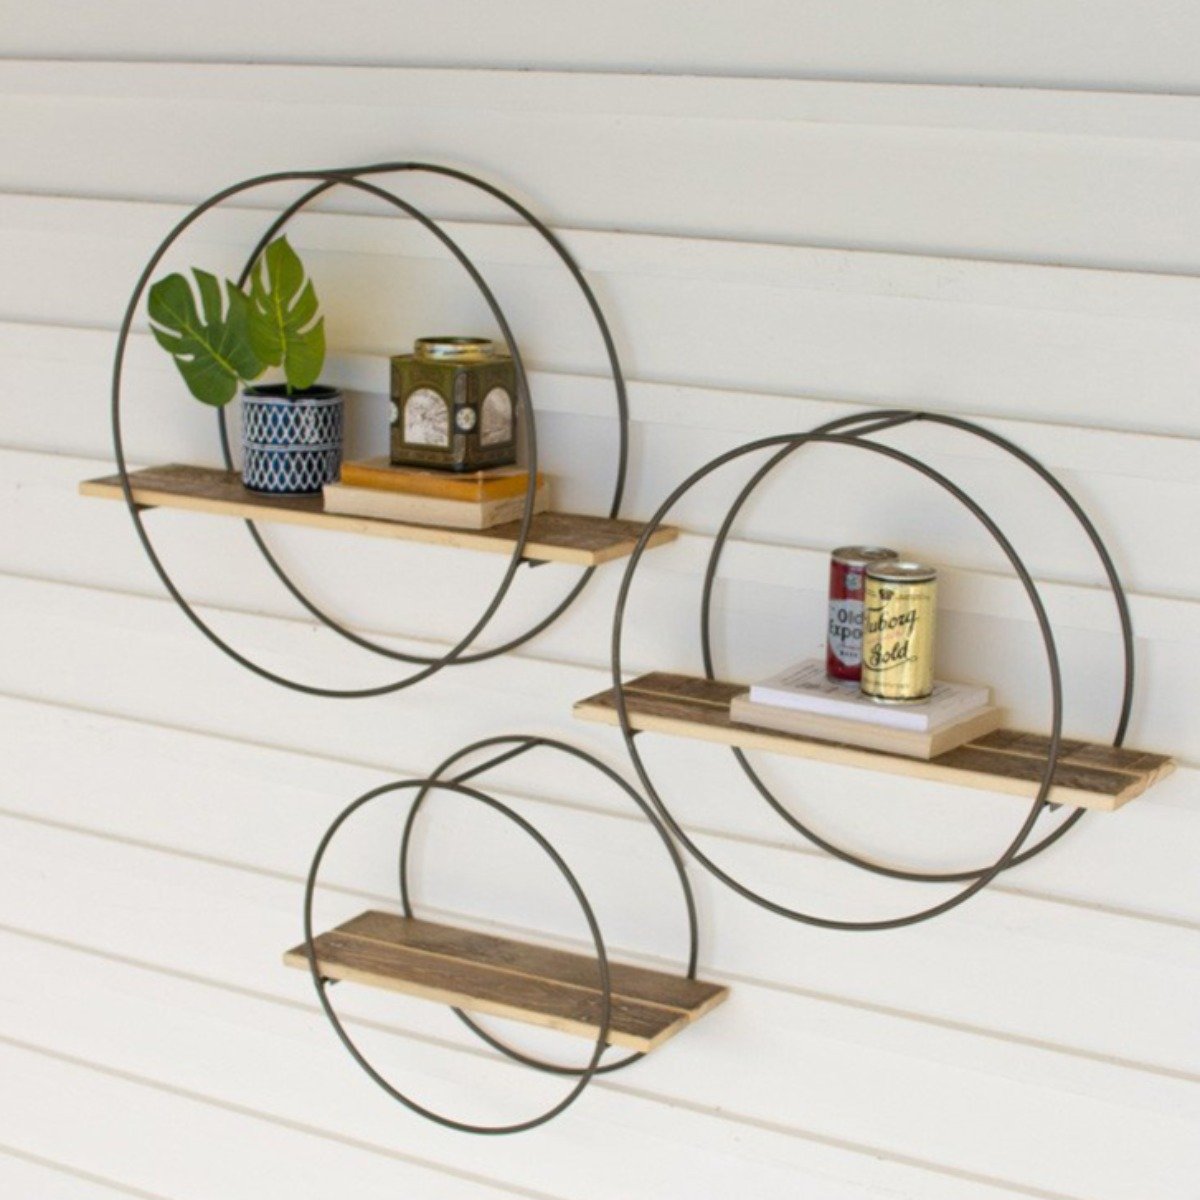 Decorative Wall Shelves - Iron Accents